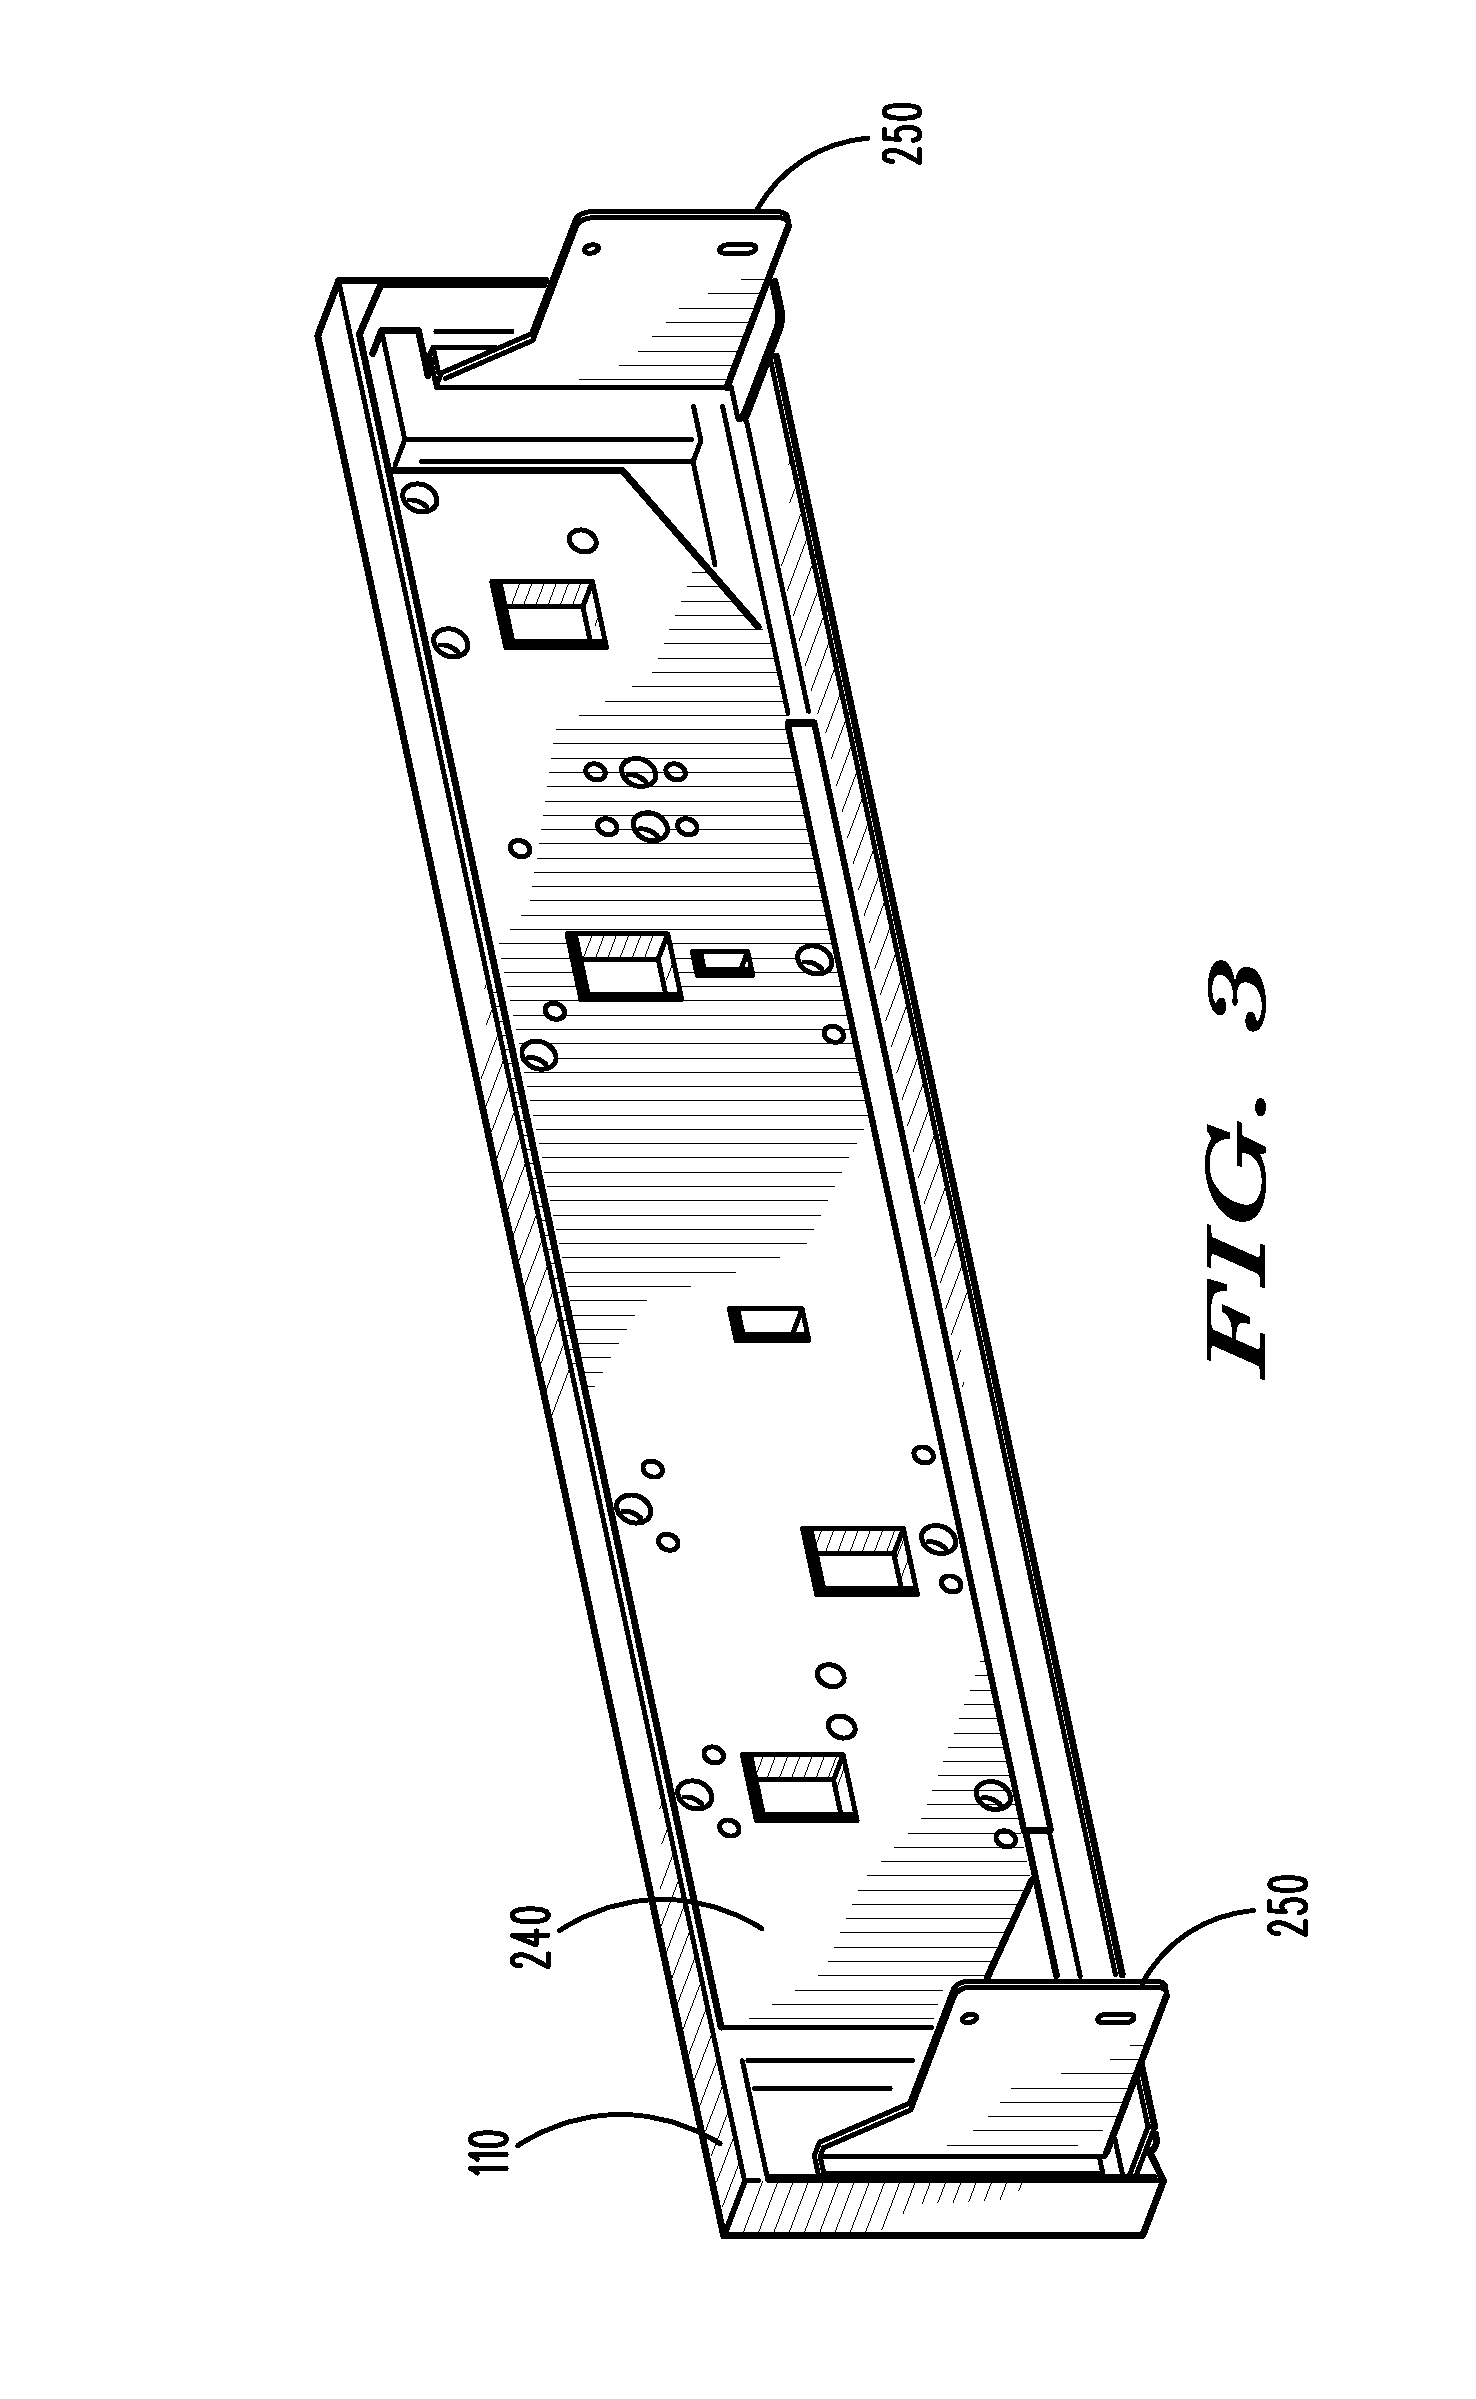 Manifold assembly for a domestic kitchen appliance